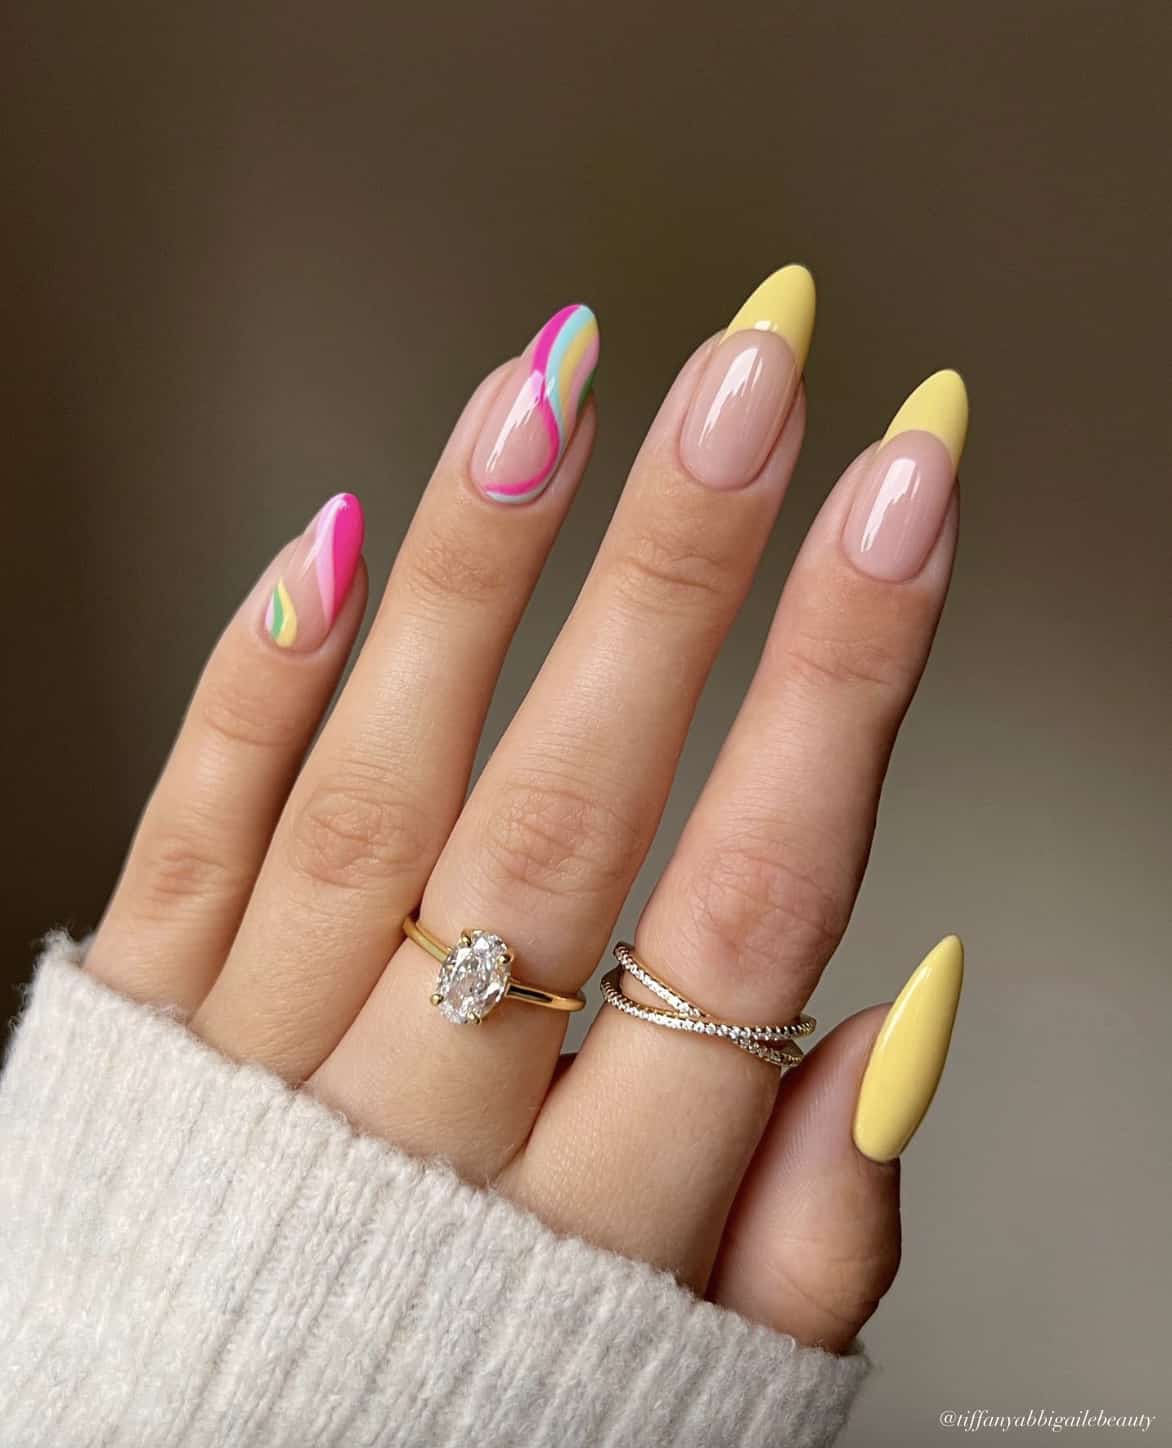 A hand with medium almond nails painted with various summer nail designs, including yellow French tips, a solid yellow nail, and yellow, blue, and pink swirled nails